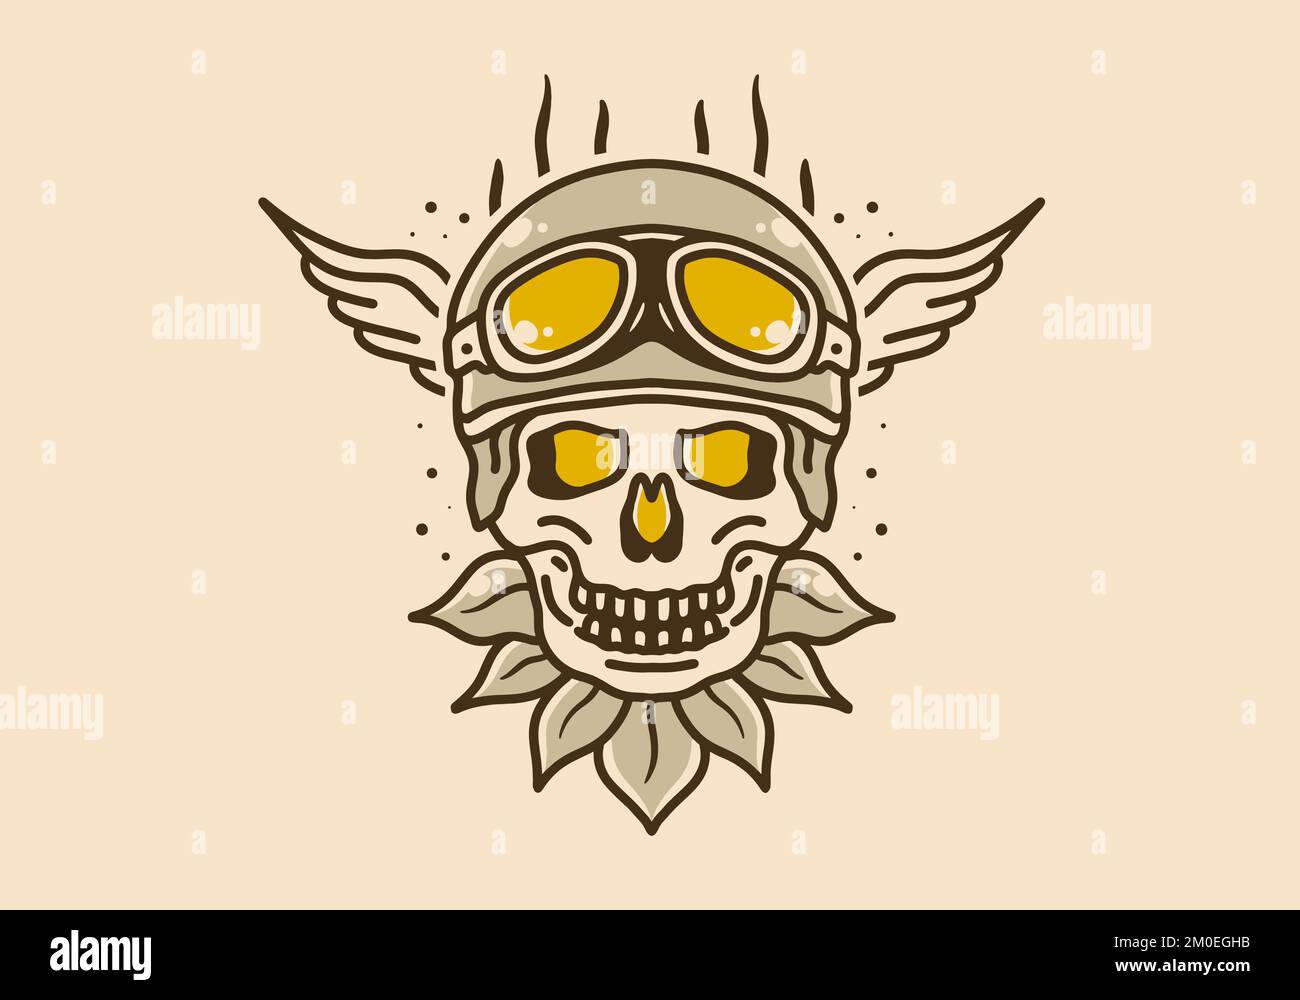 Vintage art illustration design of skull wearing a helmet and goggles with wings on the sides Stock Vector